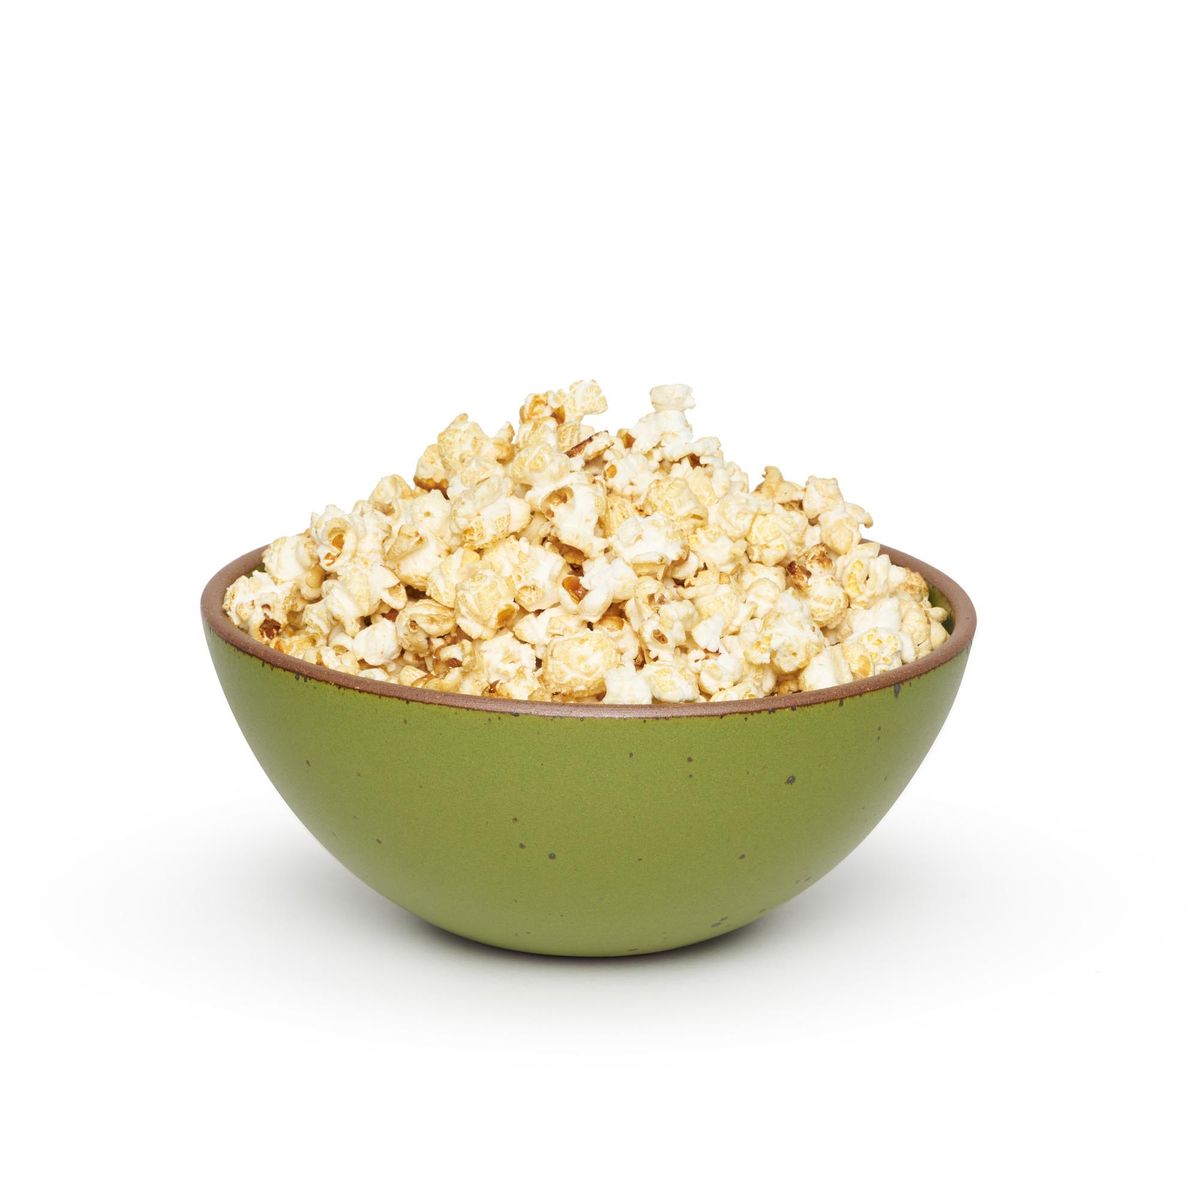 Popcorn Bowl in Fiddlehead, a mossy, olive green. Pictured here with a heaping pile of perfectly buttered popcorn.